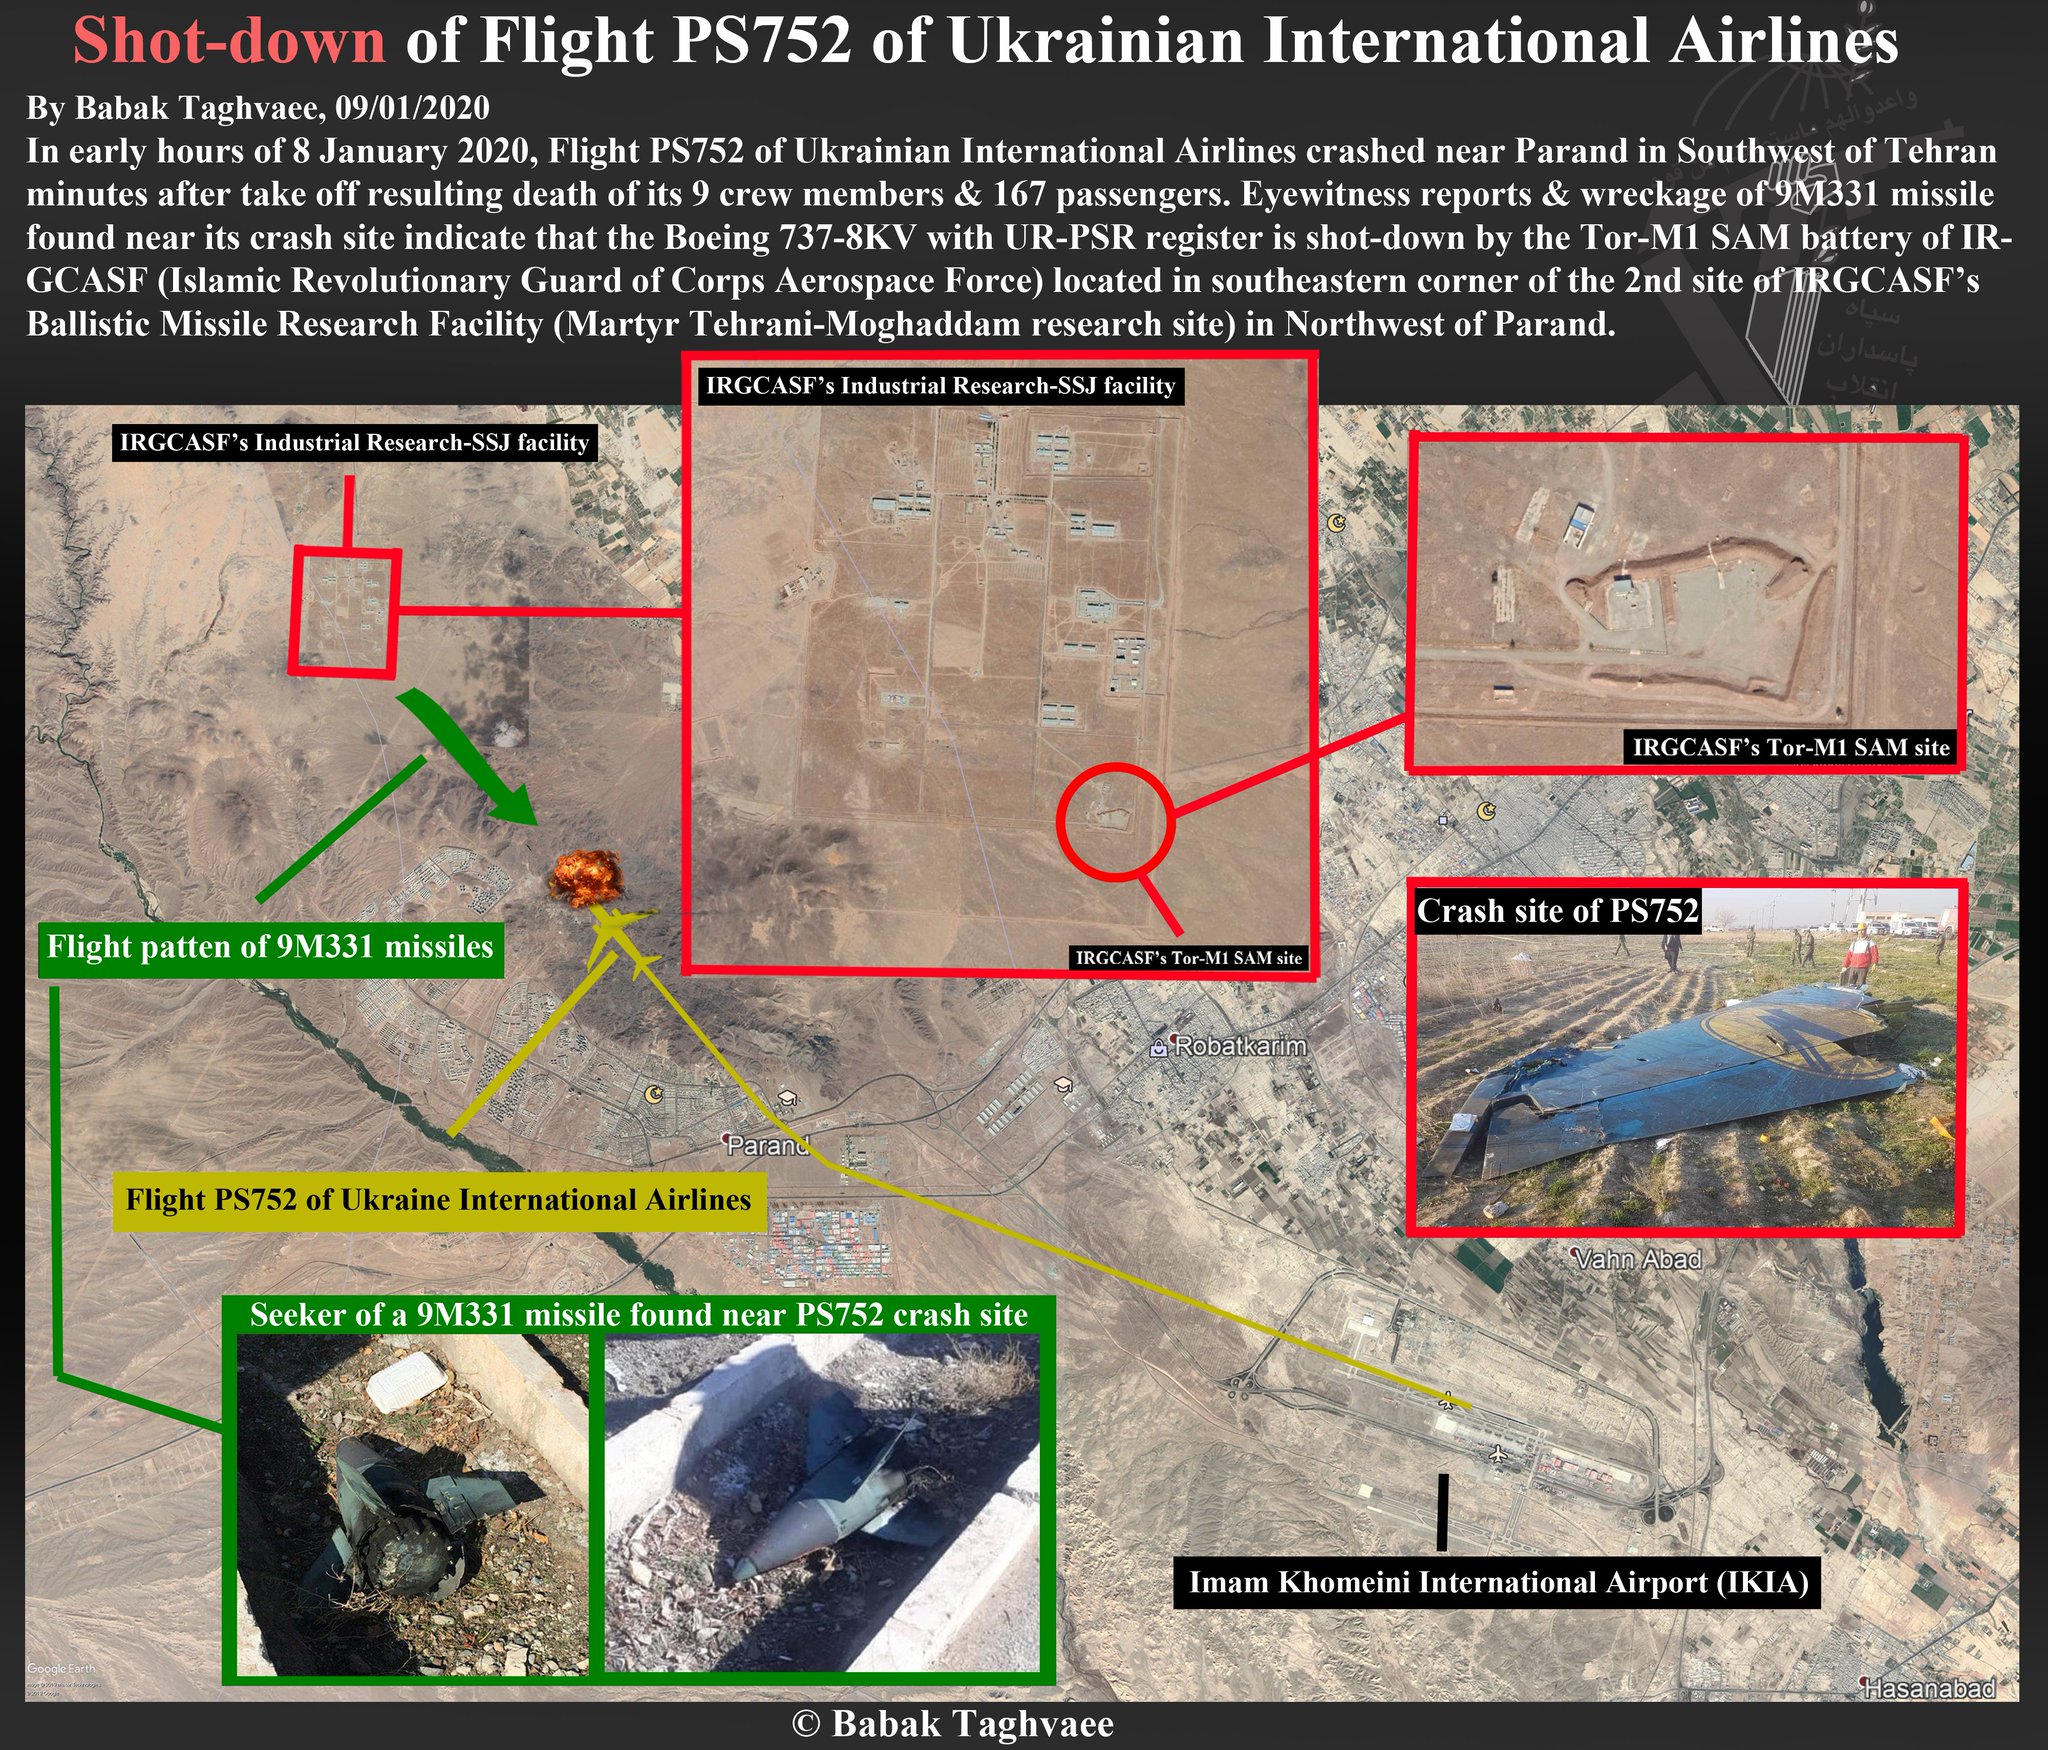 Accidente Ukraine International Airlines (UIA) en Irán. - Forum Aircraft, Airports and Airlines